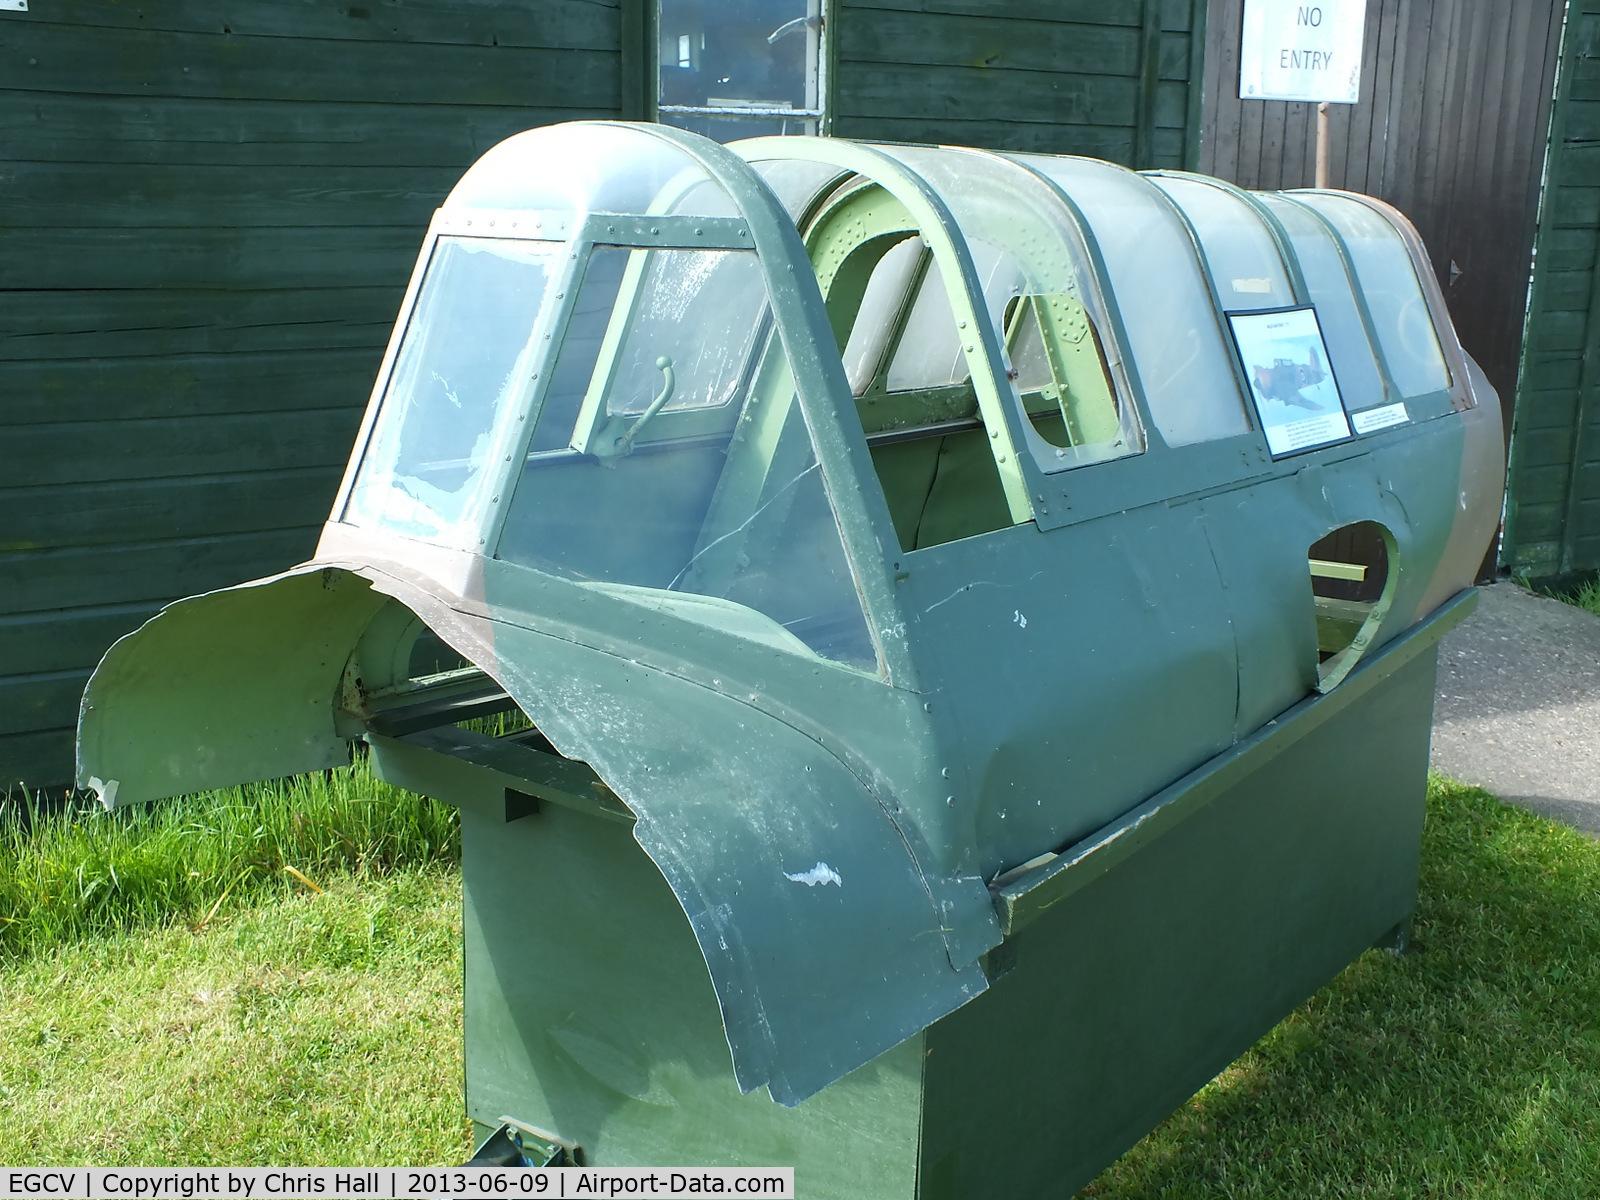 Sleap Airfield Airport, Shrewsbury, England United Kingdom (EGCV) - Miles M.25 Martinet canopy at the Wartime Aircraft Recovery Group, Sleap